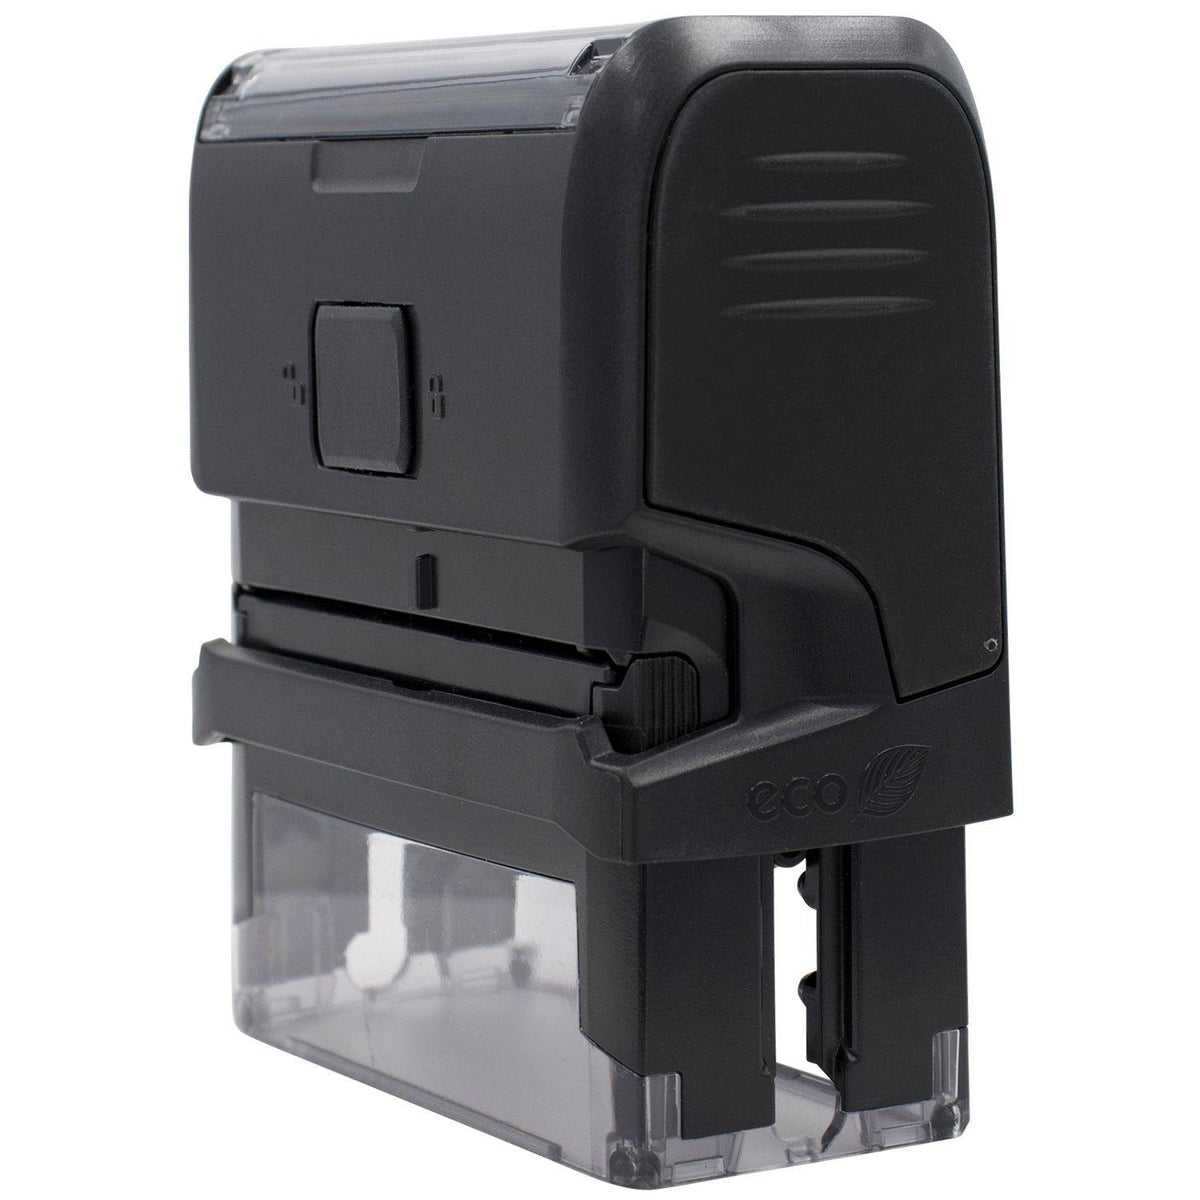 Self Inking School Property Stamp - Engineer Seal Stamps - Brand_Trodat, Impression Size_Small, Stamp Type_Self-Inking Stamp, Type of Use_Teacher